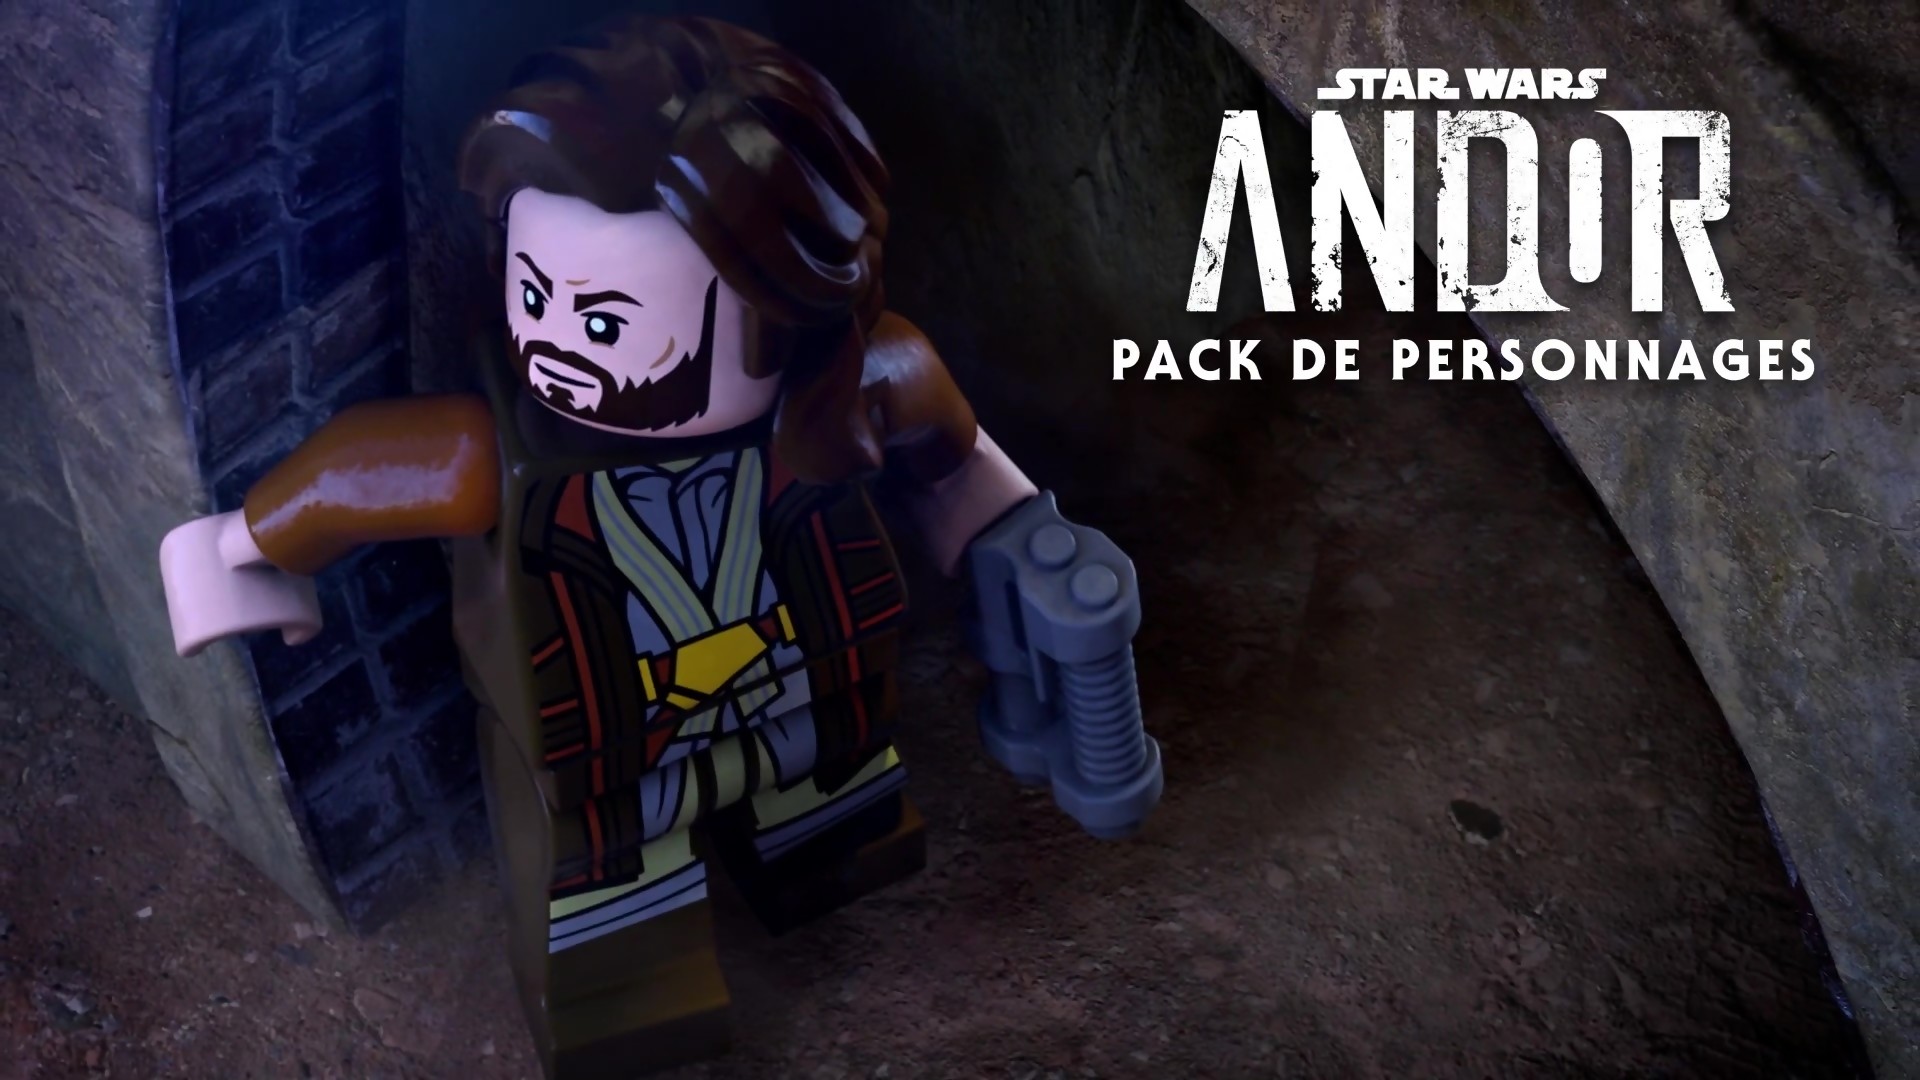 Les personnages LEGO Skywalker Saga Galactic Edition dont nous avons besoin